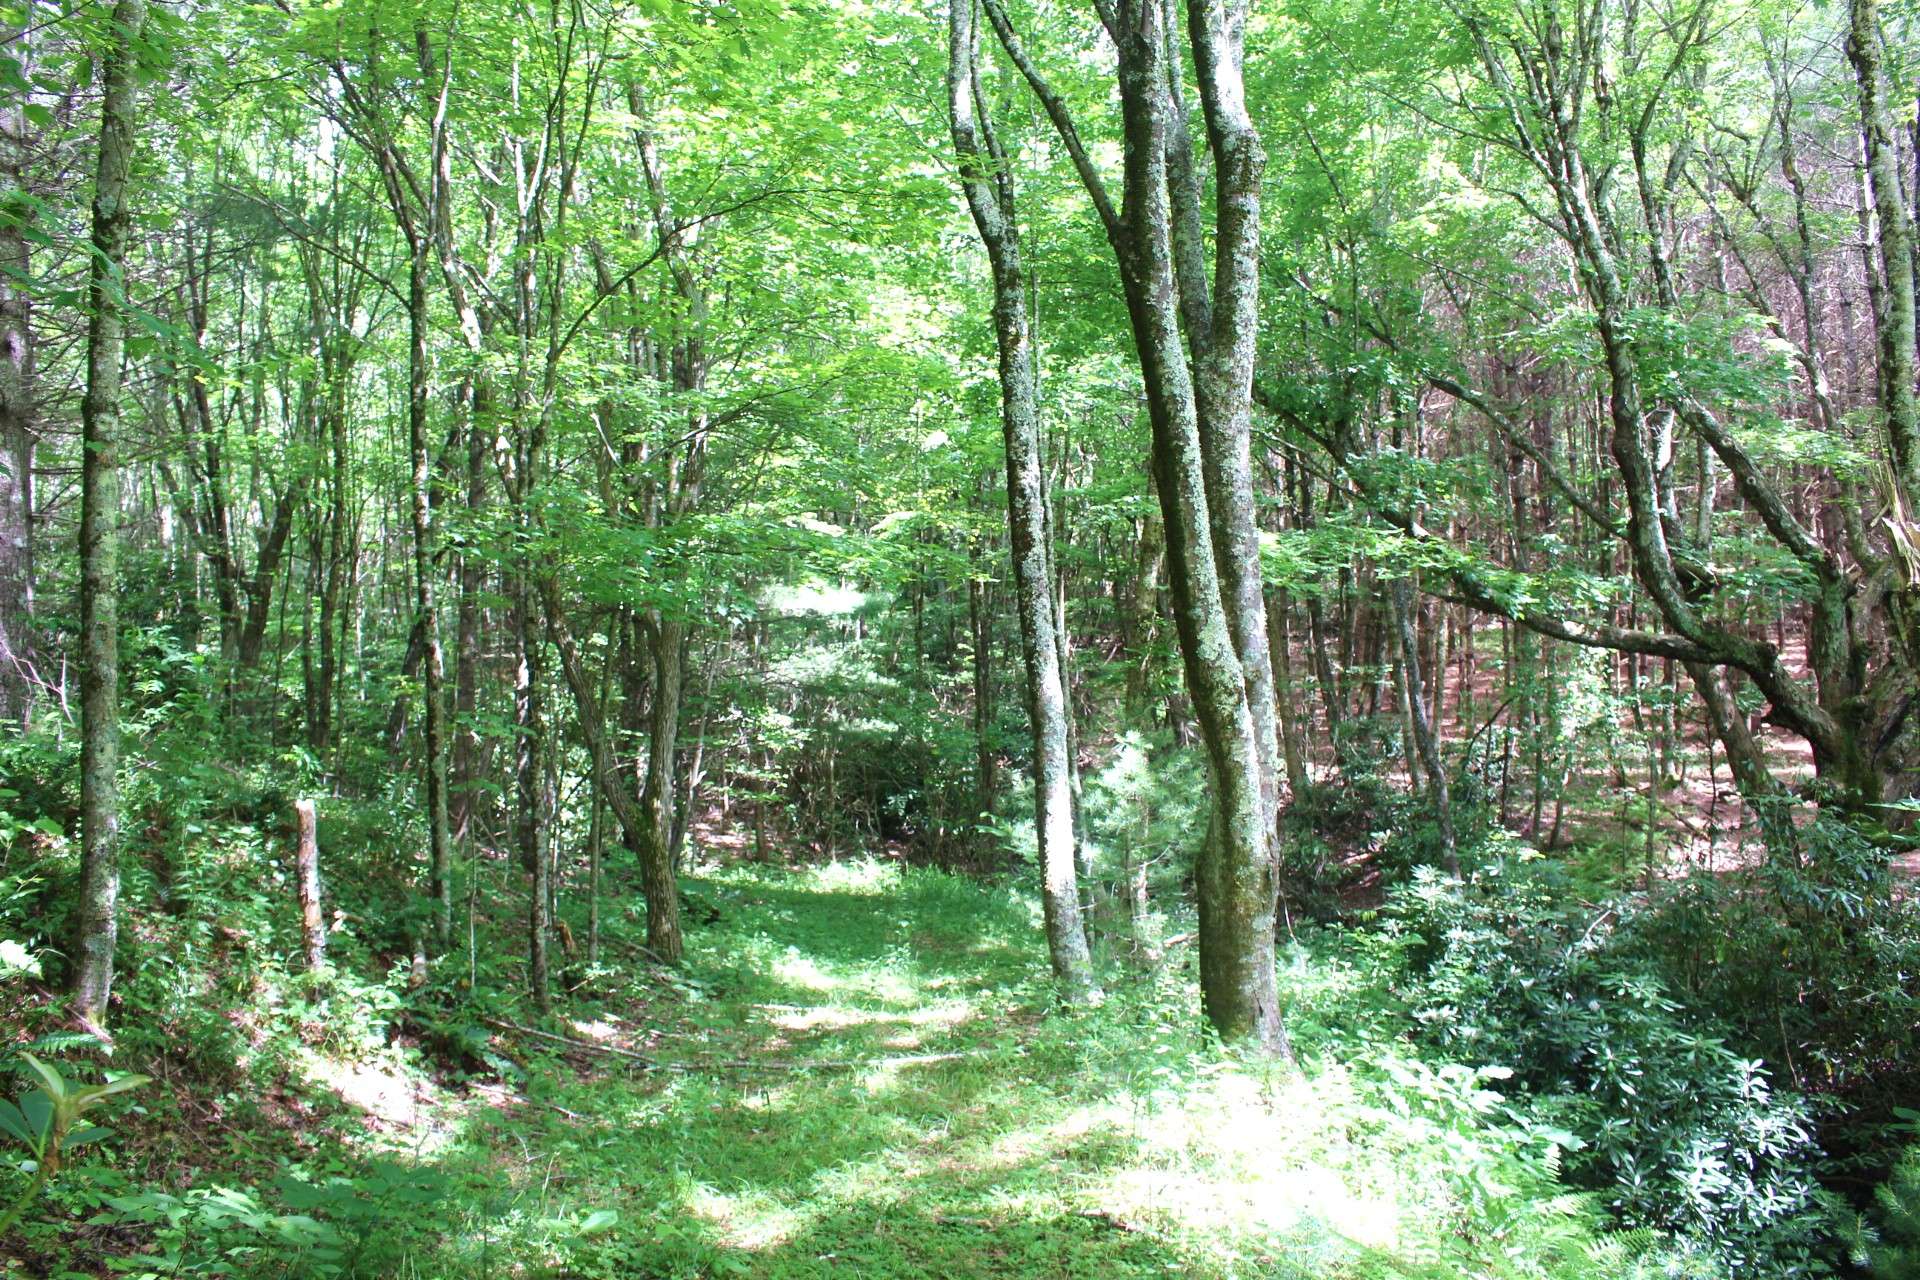 The land lays well and features a mixed terrain with hardwoods, evergreens, and native mountain foliage.